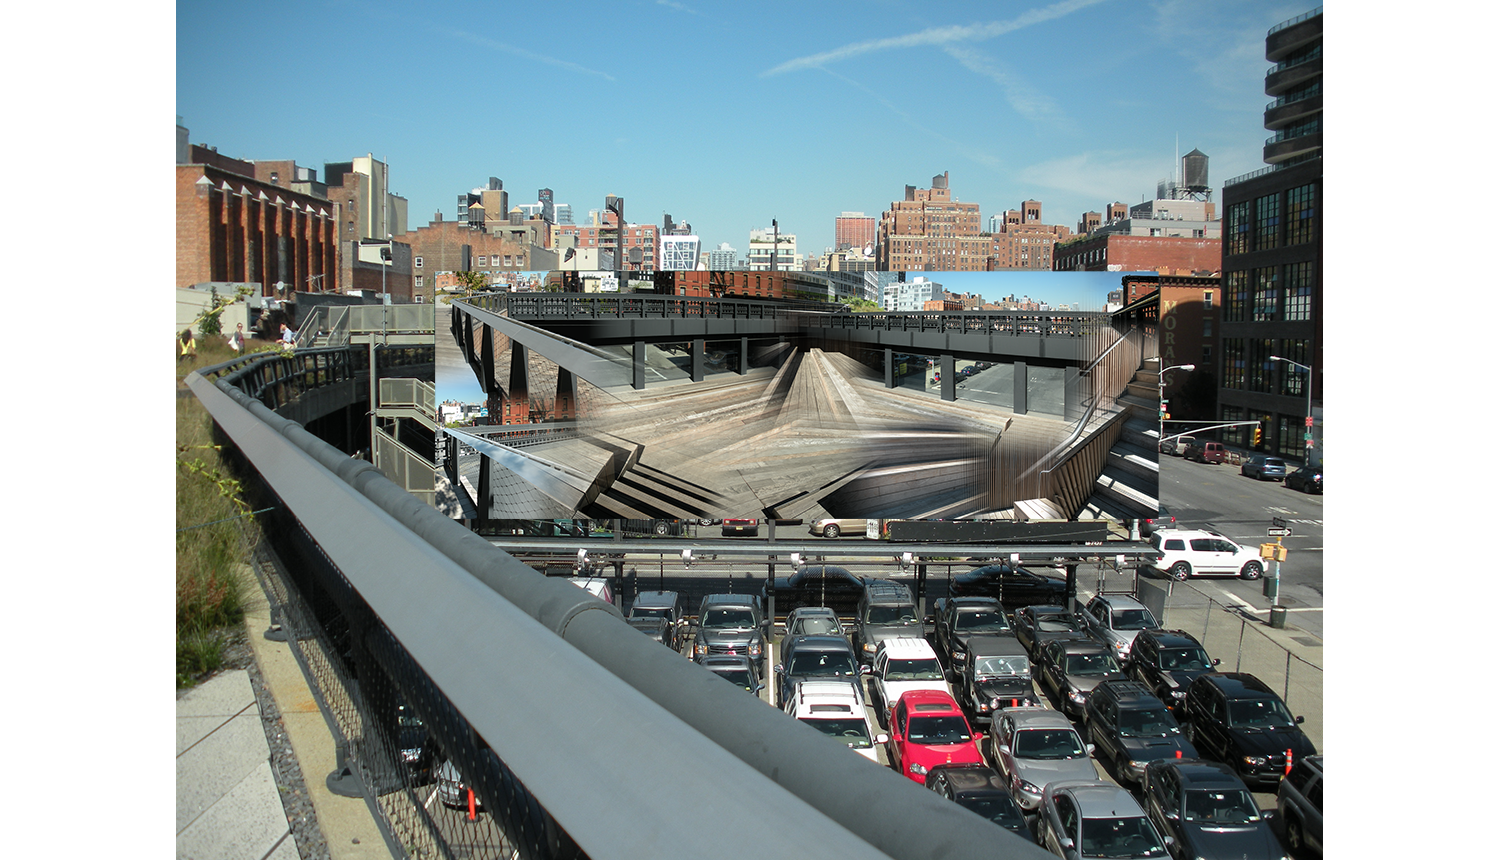   The Stage,  Visualization of a digital mural, as seen from the High Line, 2011 